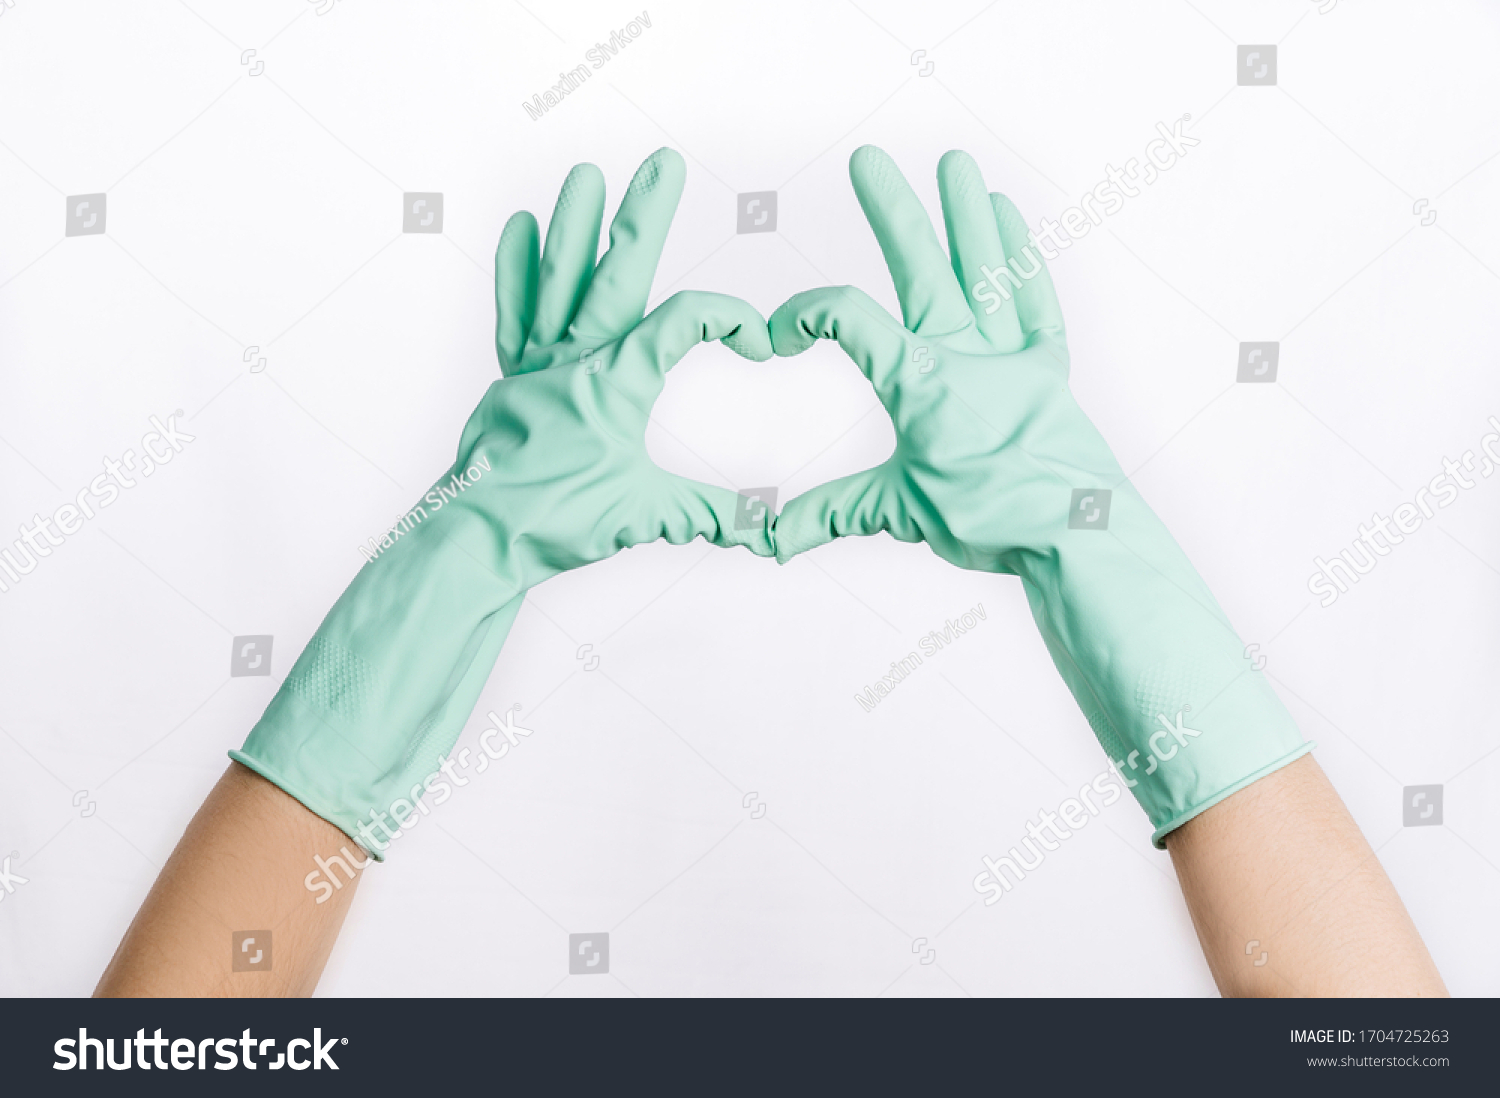 hands in latex rubber mint gloves cleaning quarantine covid-19 #1704725263